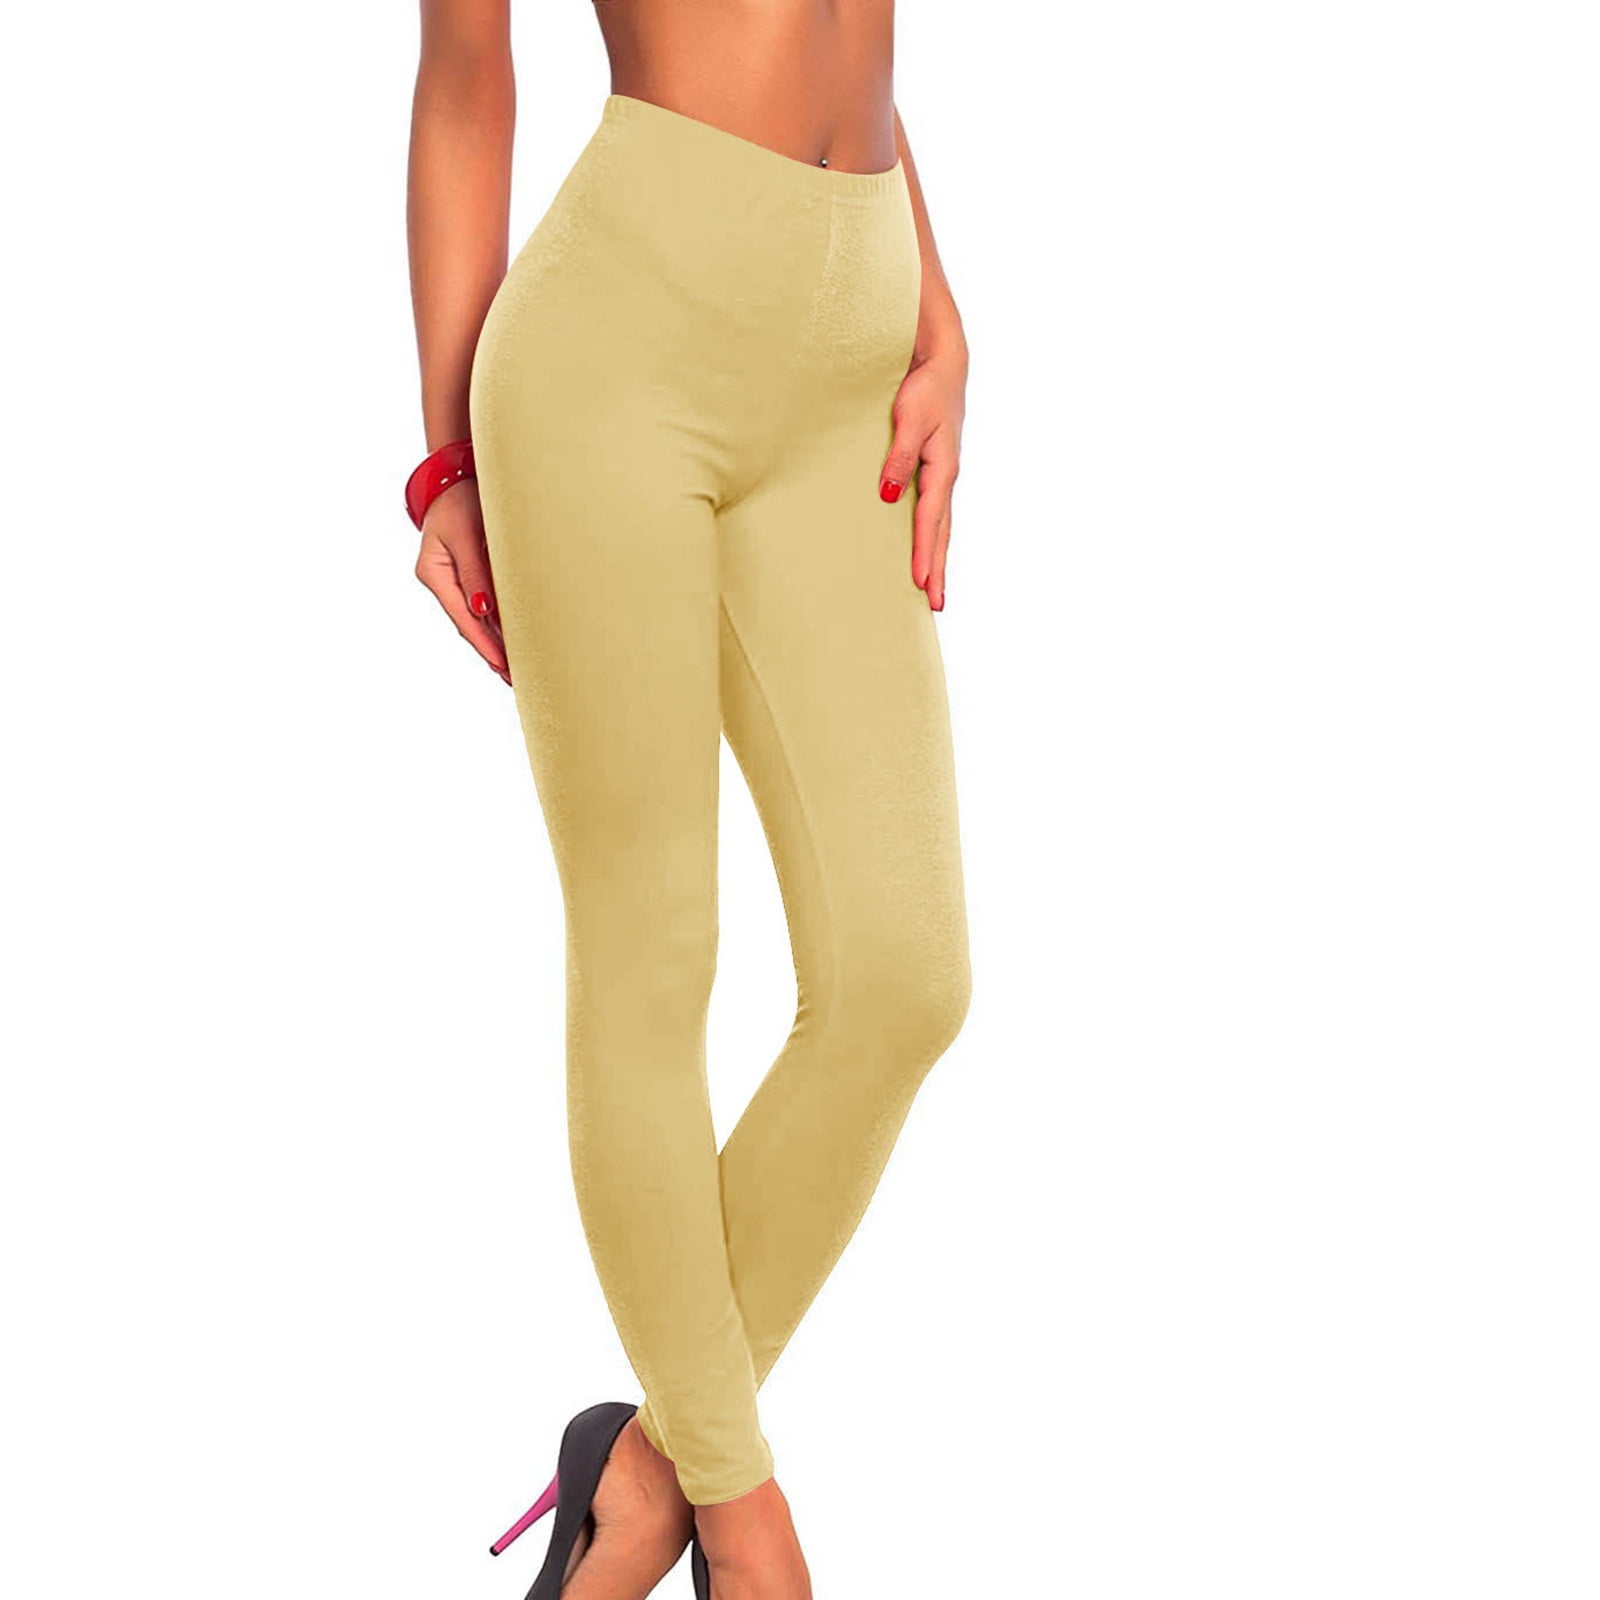 Capri Leggings for Women Sports Fitness Pants Solid Colored Casual